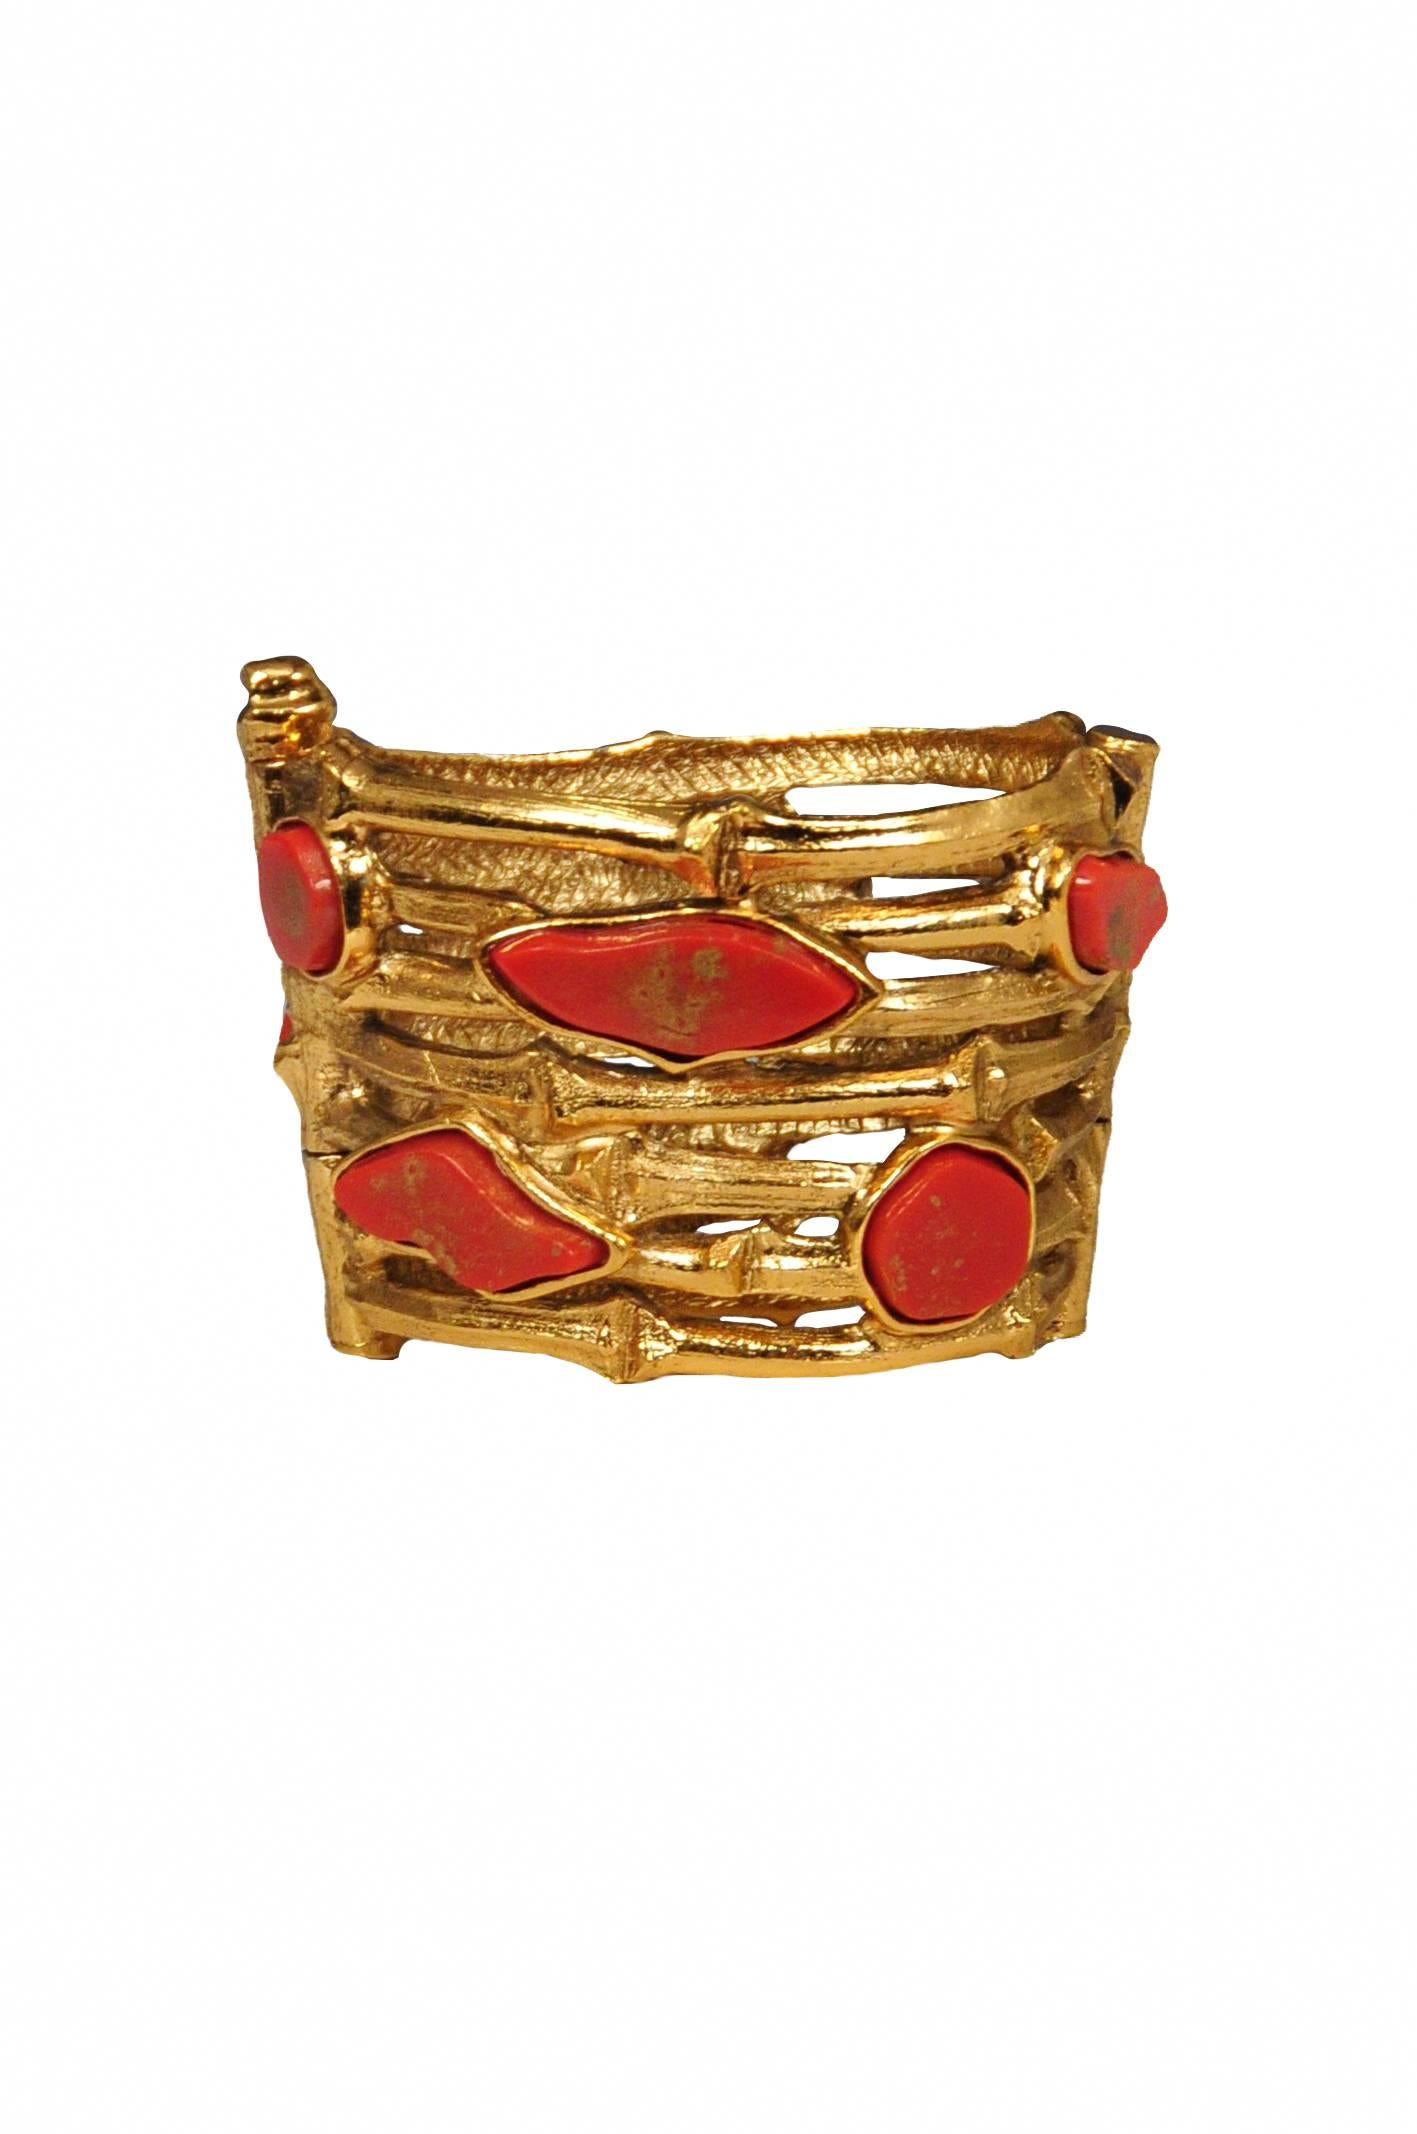 Yves Saint Laurent Rive Gauche gold bamboo wide bangle with coral inlay. Bracelet is wider at base and has 3